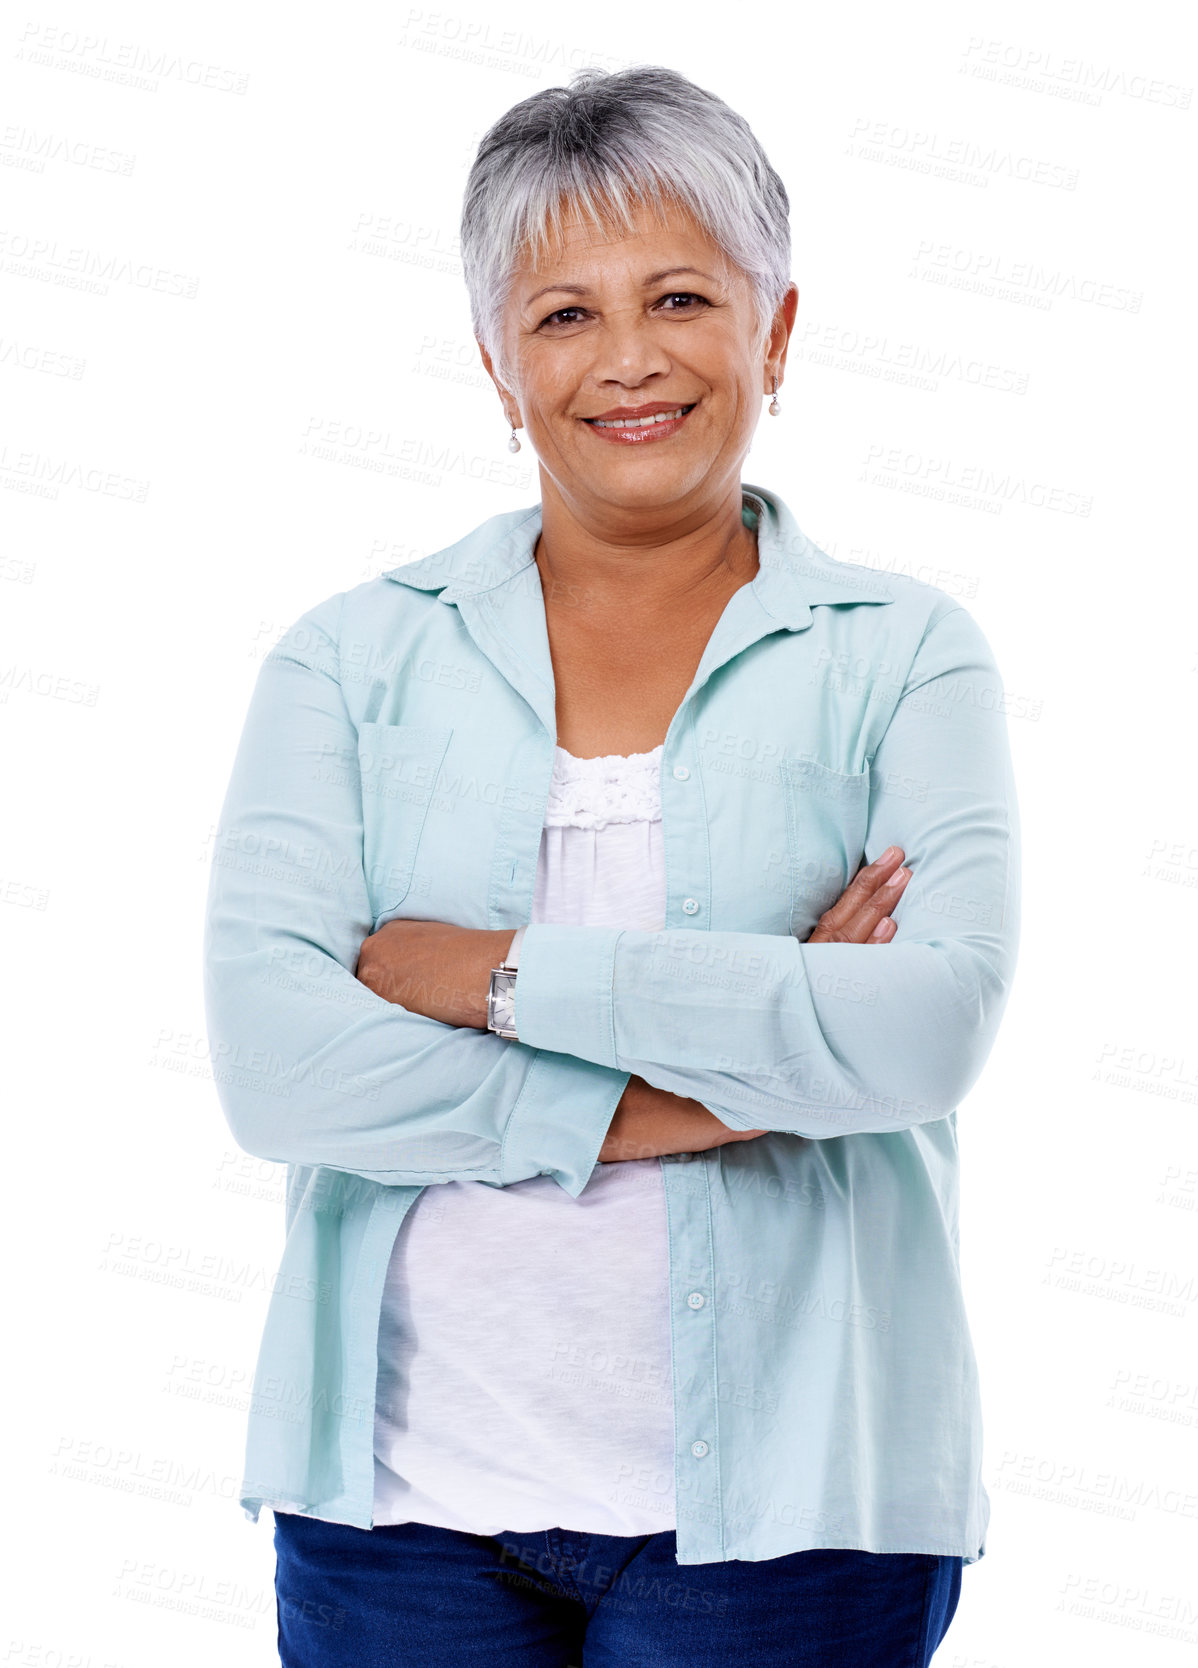 Buy stock photo Studio shot of a mature woman isolated on white